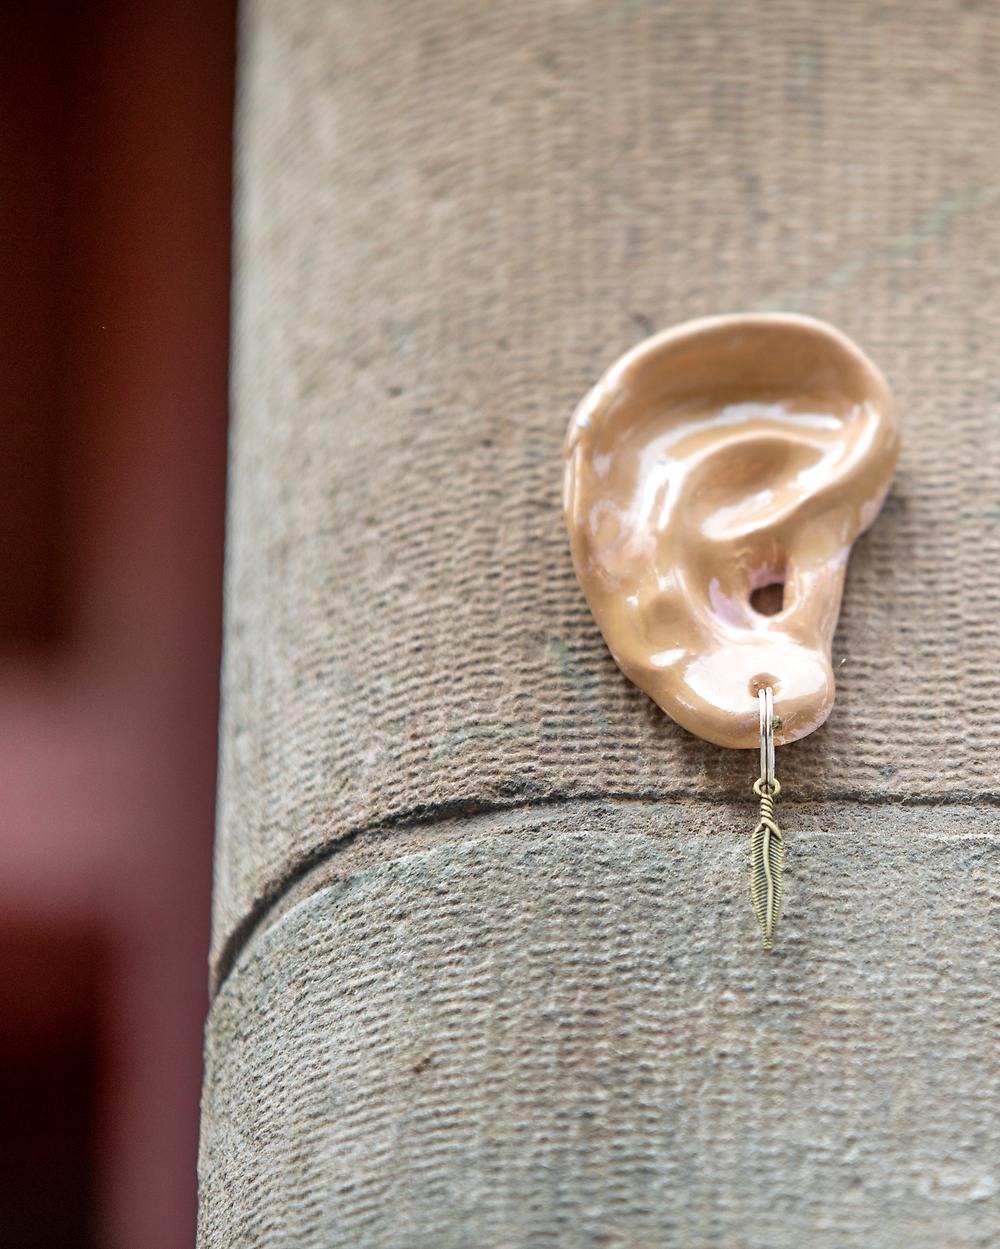 Close-up of an ear made of ceramic sits mounted on a house wall.